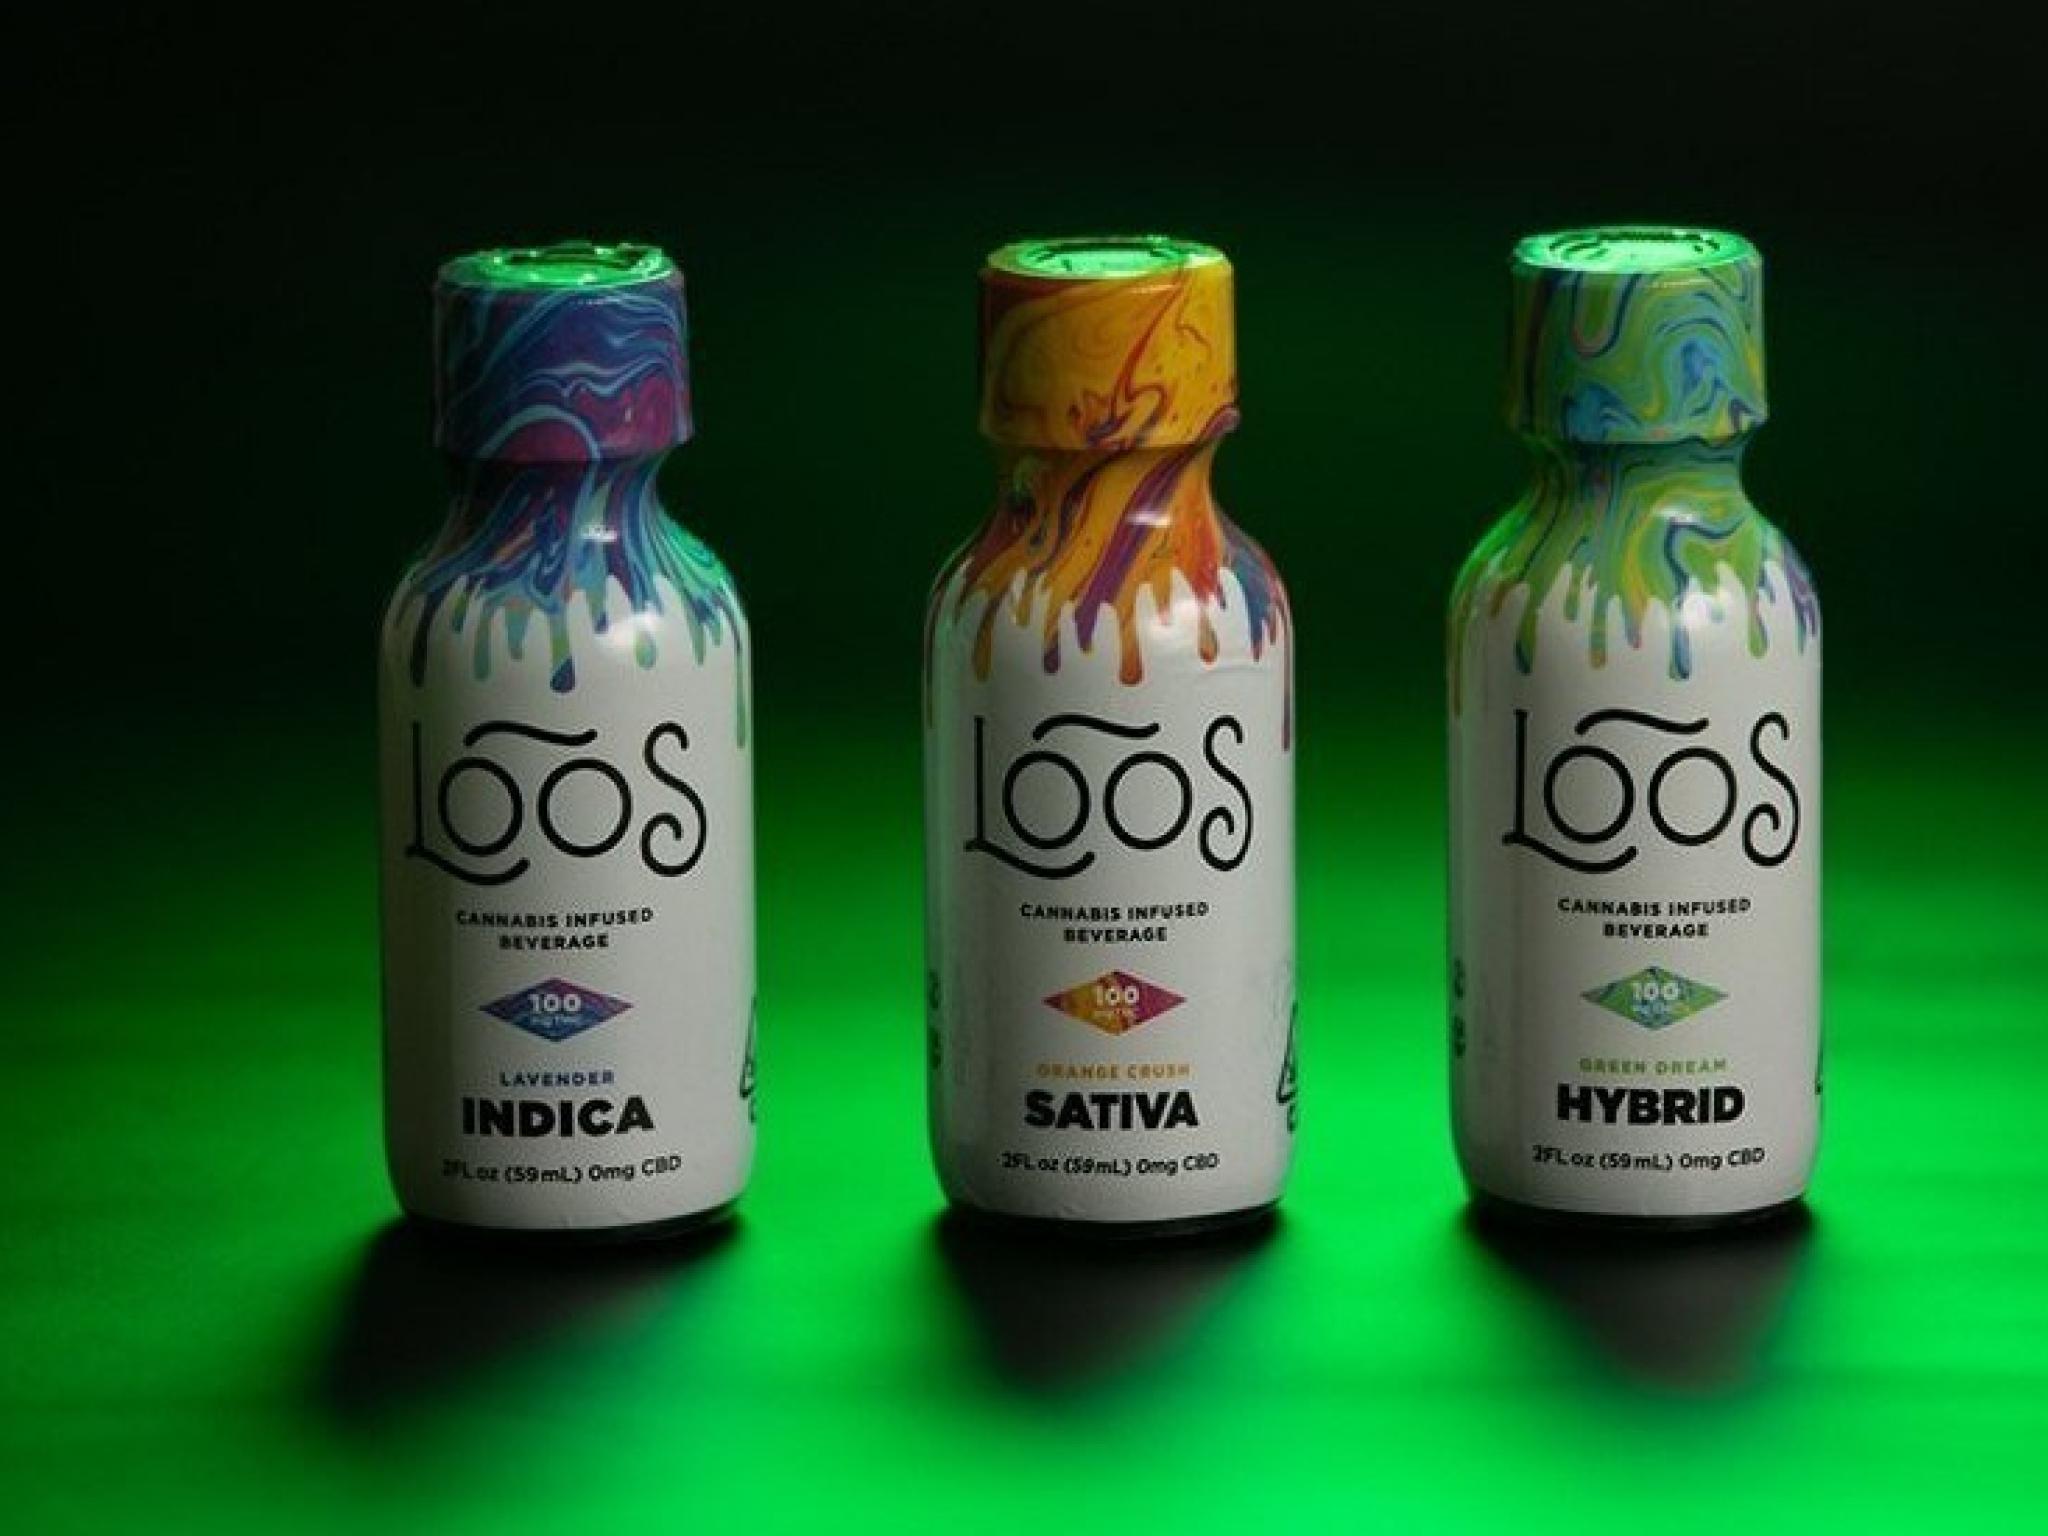  audacious-ramps-up-footprint-in-californias-canna-beverage-market-with-loos-acquisition 